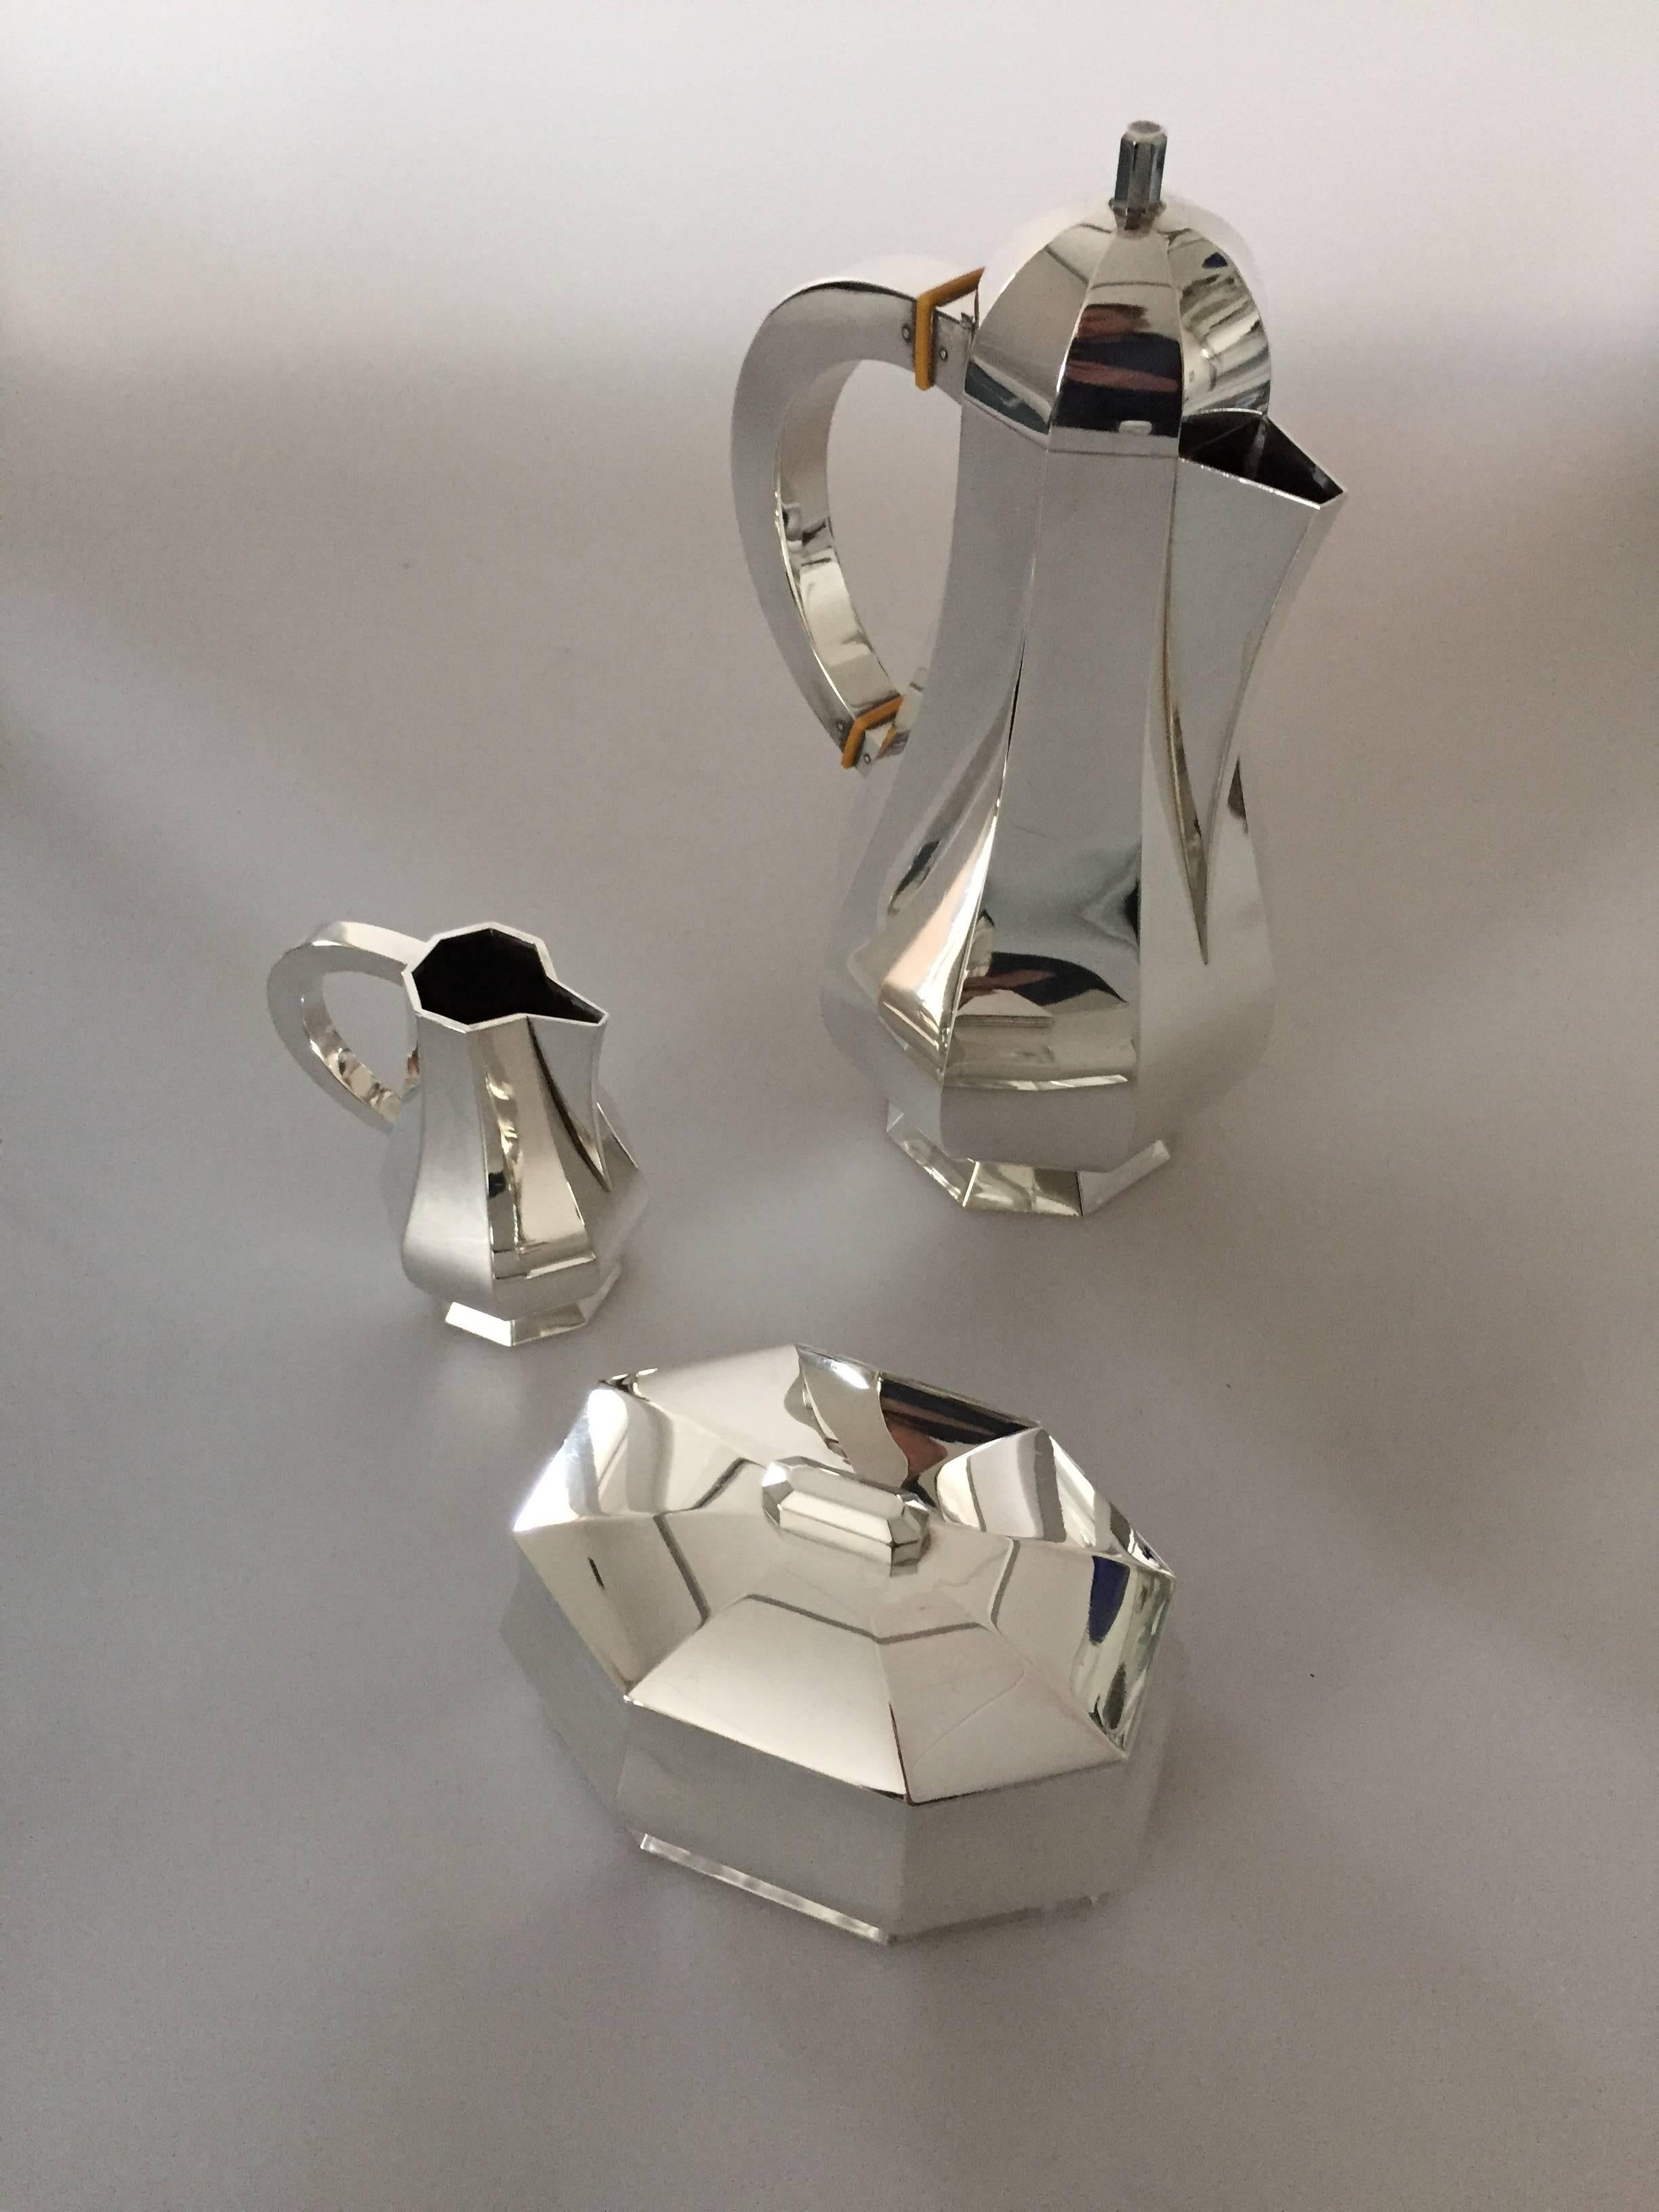 Wiwen Nilsson sterling silver coffee set with coffee pot, creamer and sugar bowl with cover. All parts are inperfect condition. From circa 1940s-1950s.

Coffee pot measures 26 cm tall, 12 cm in diameter at widest point.
Sugar bowl measures 8 cm